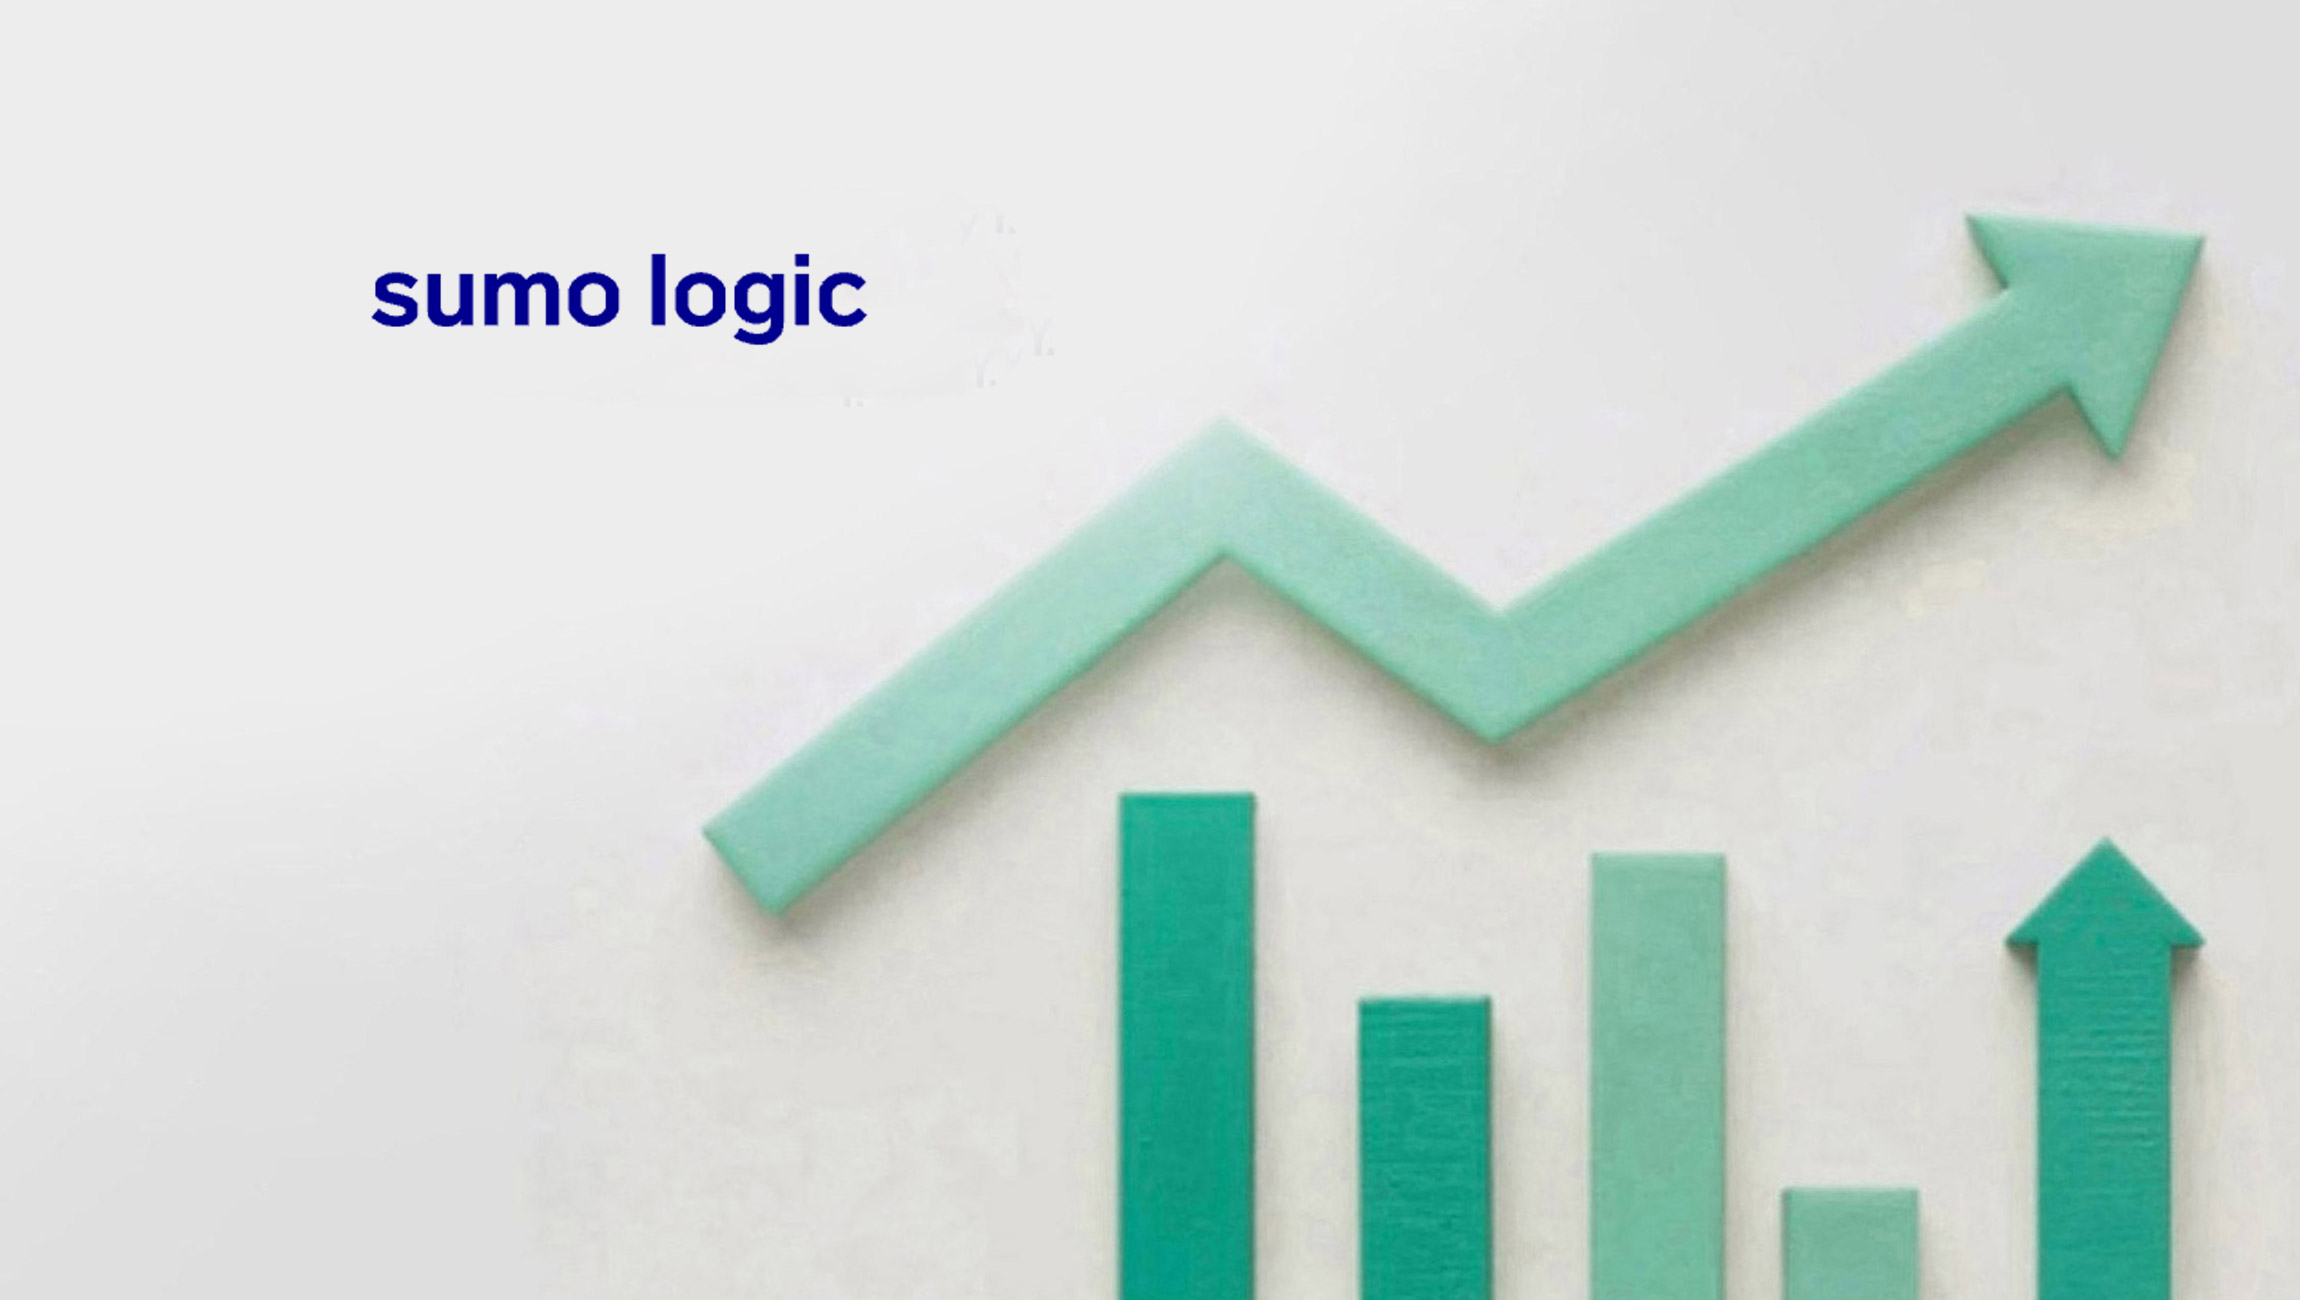 Sumo-Logic-Addresses-Digital-Transformation-Complexity-Driven-By-Exponential-Growth-of-Digital-Services